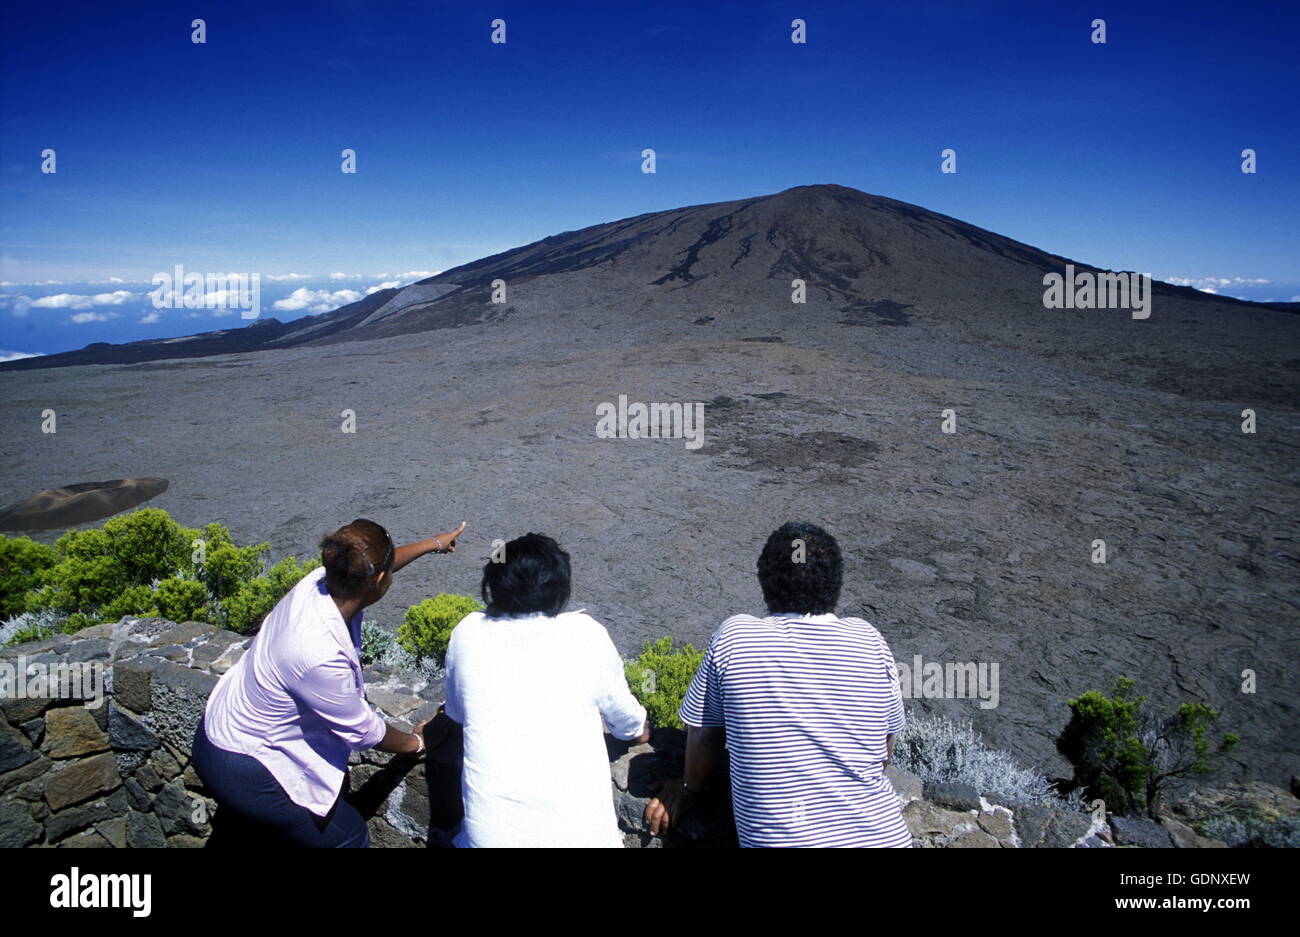 The Landscape allrond the Volcano  Piton de la Fournaise on the Island of La Reunion in the Indian Ocean in Africa. Stock Photo